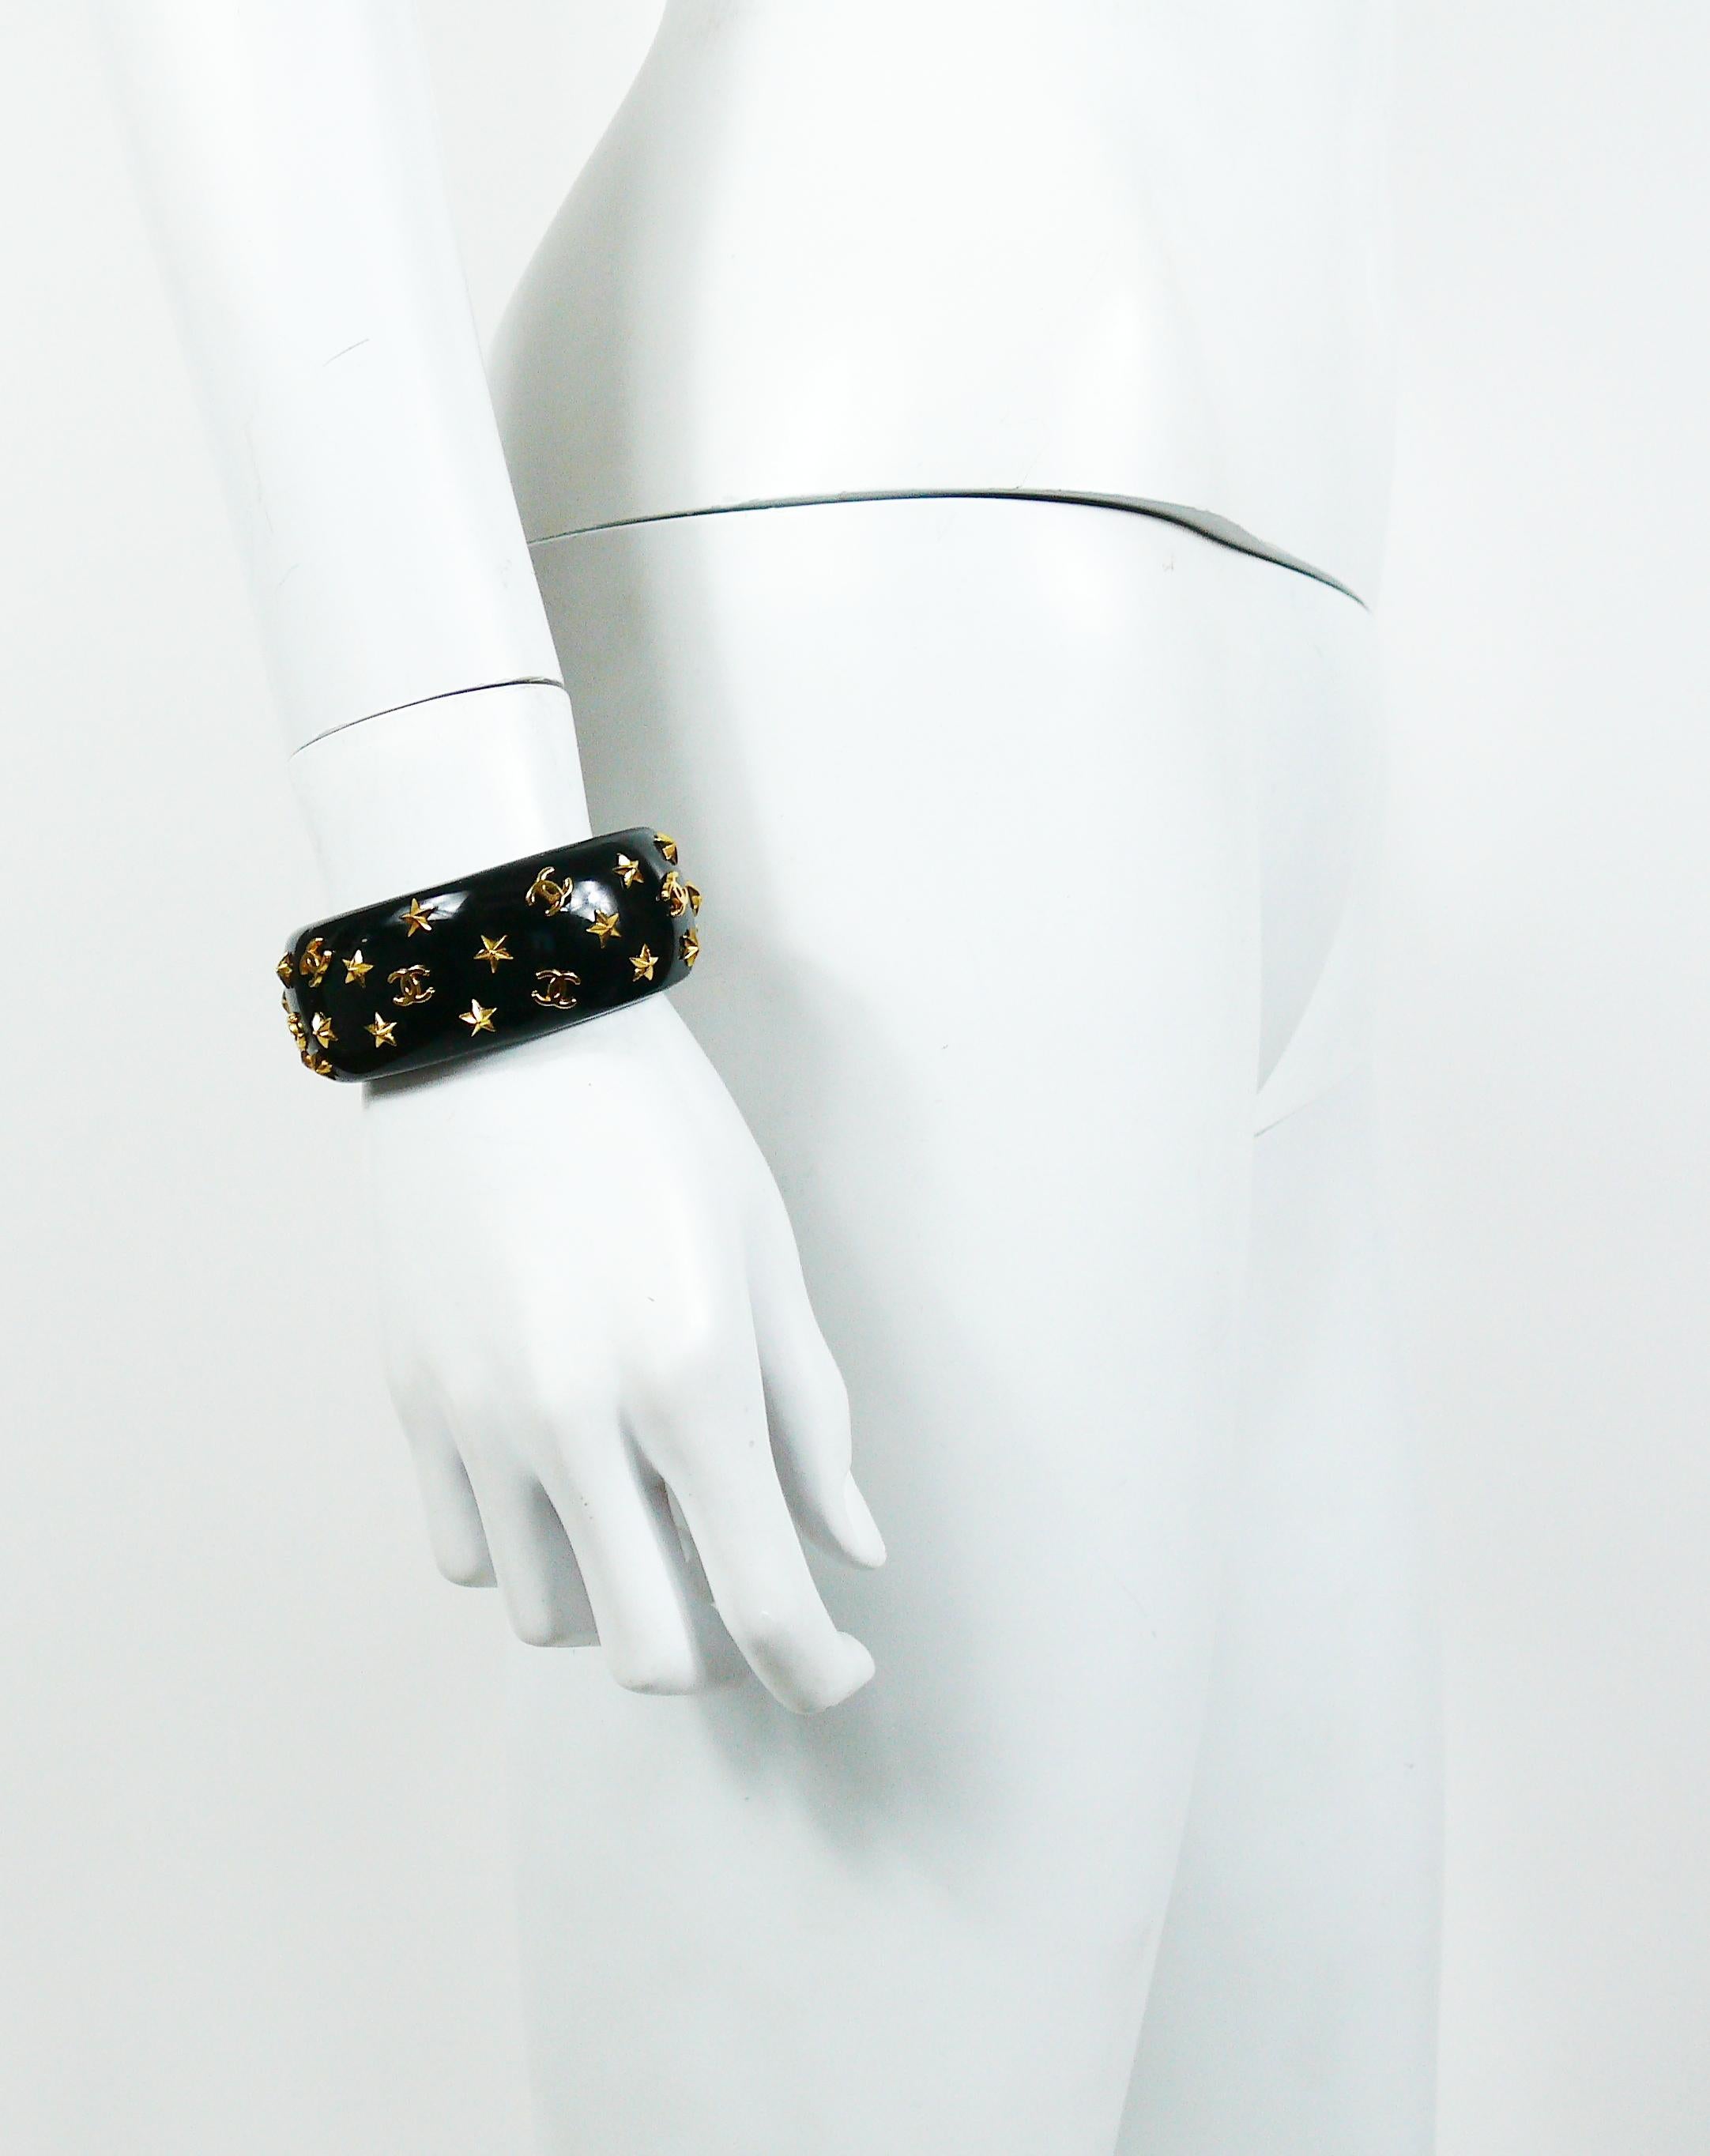 CHANEL vintage 1995 iconic black resin cuff bracelet featuring gold toned stars and CC logos. 

Fall/Winter Collection 1995.

Embossed CHANEL 95 A Made in France.

Indicative measurements : inner approx. 5.5 cm (2.17 inches) x 4.5 cm (1.77 inches) /